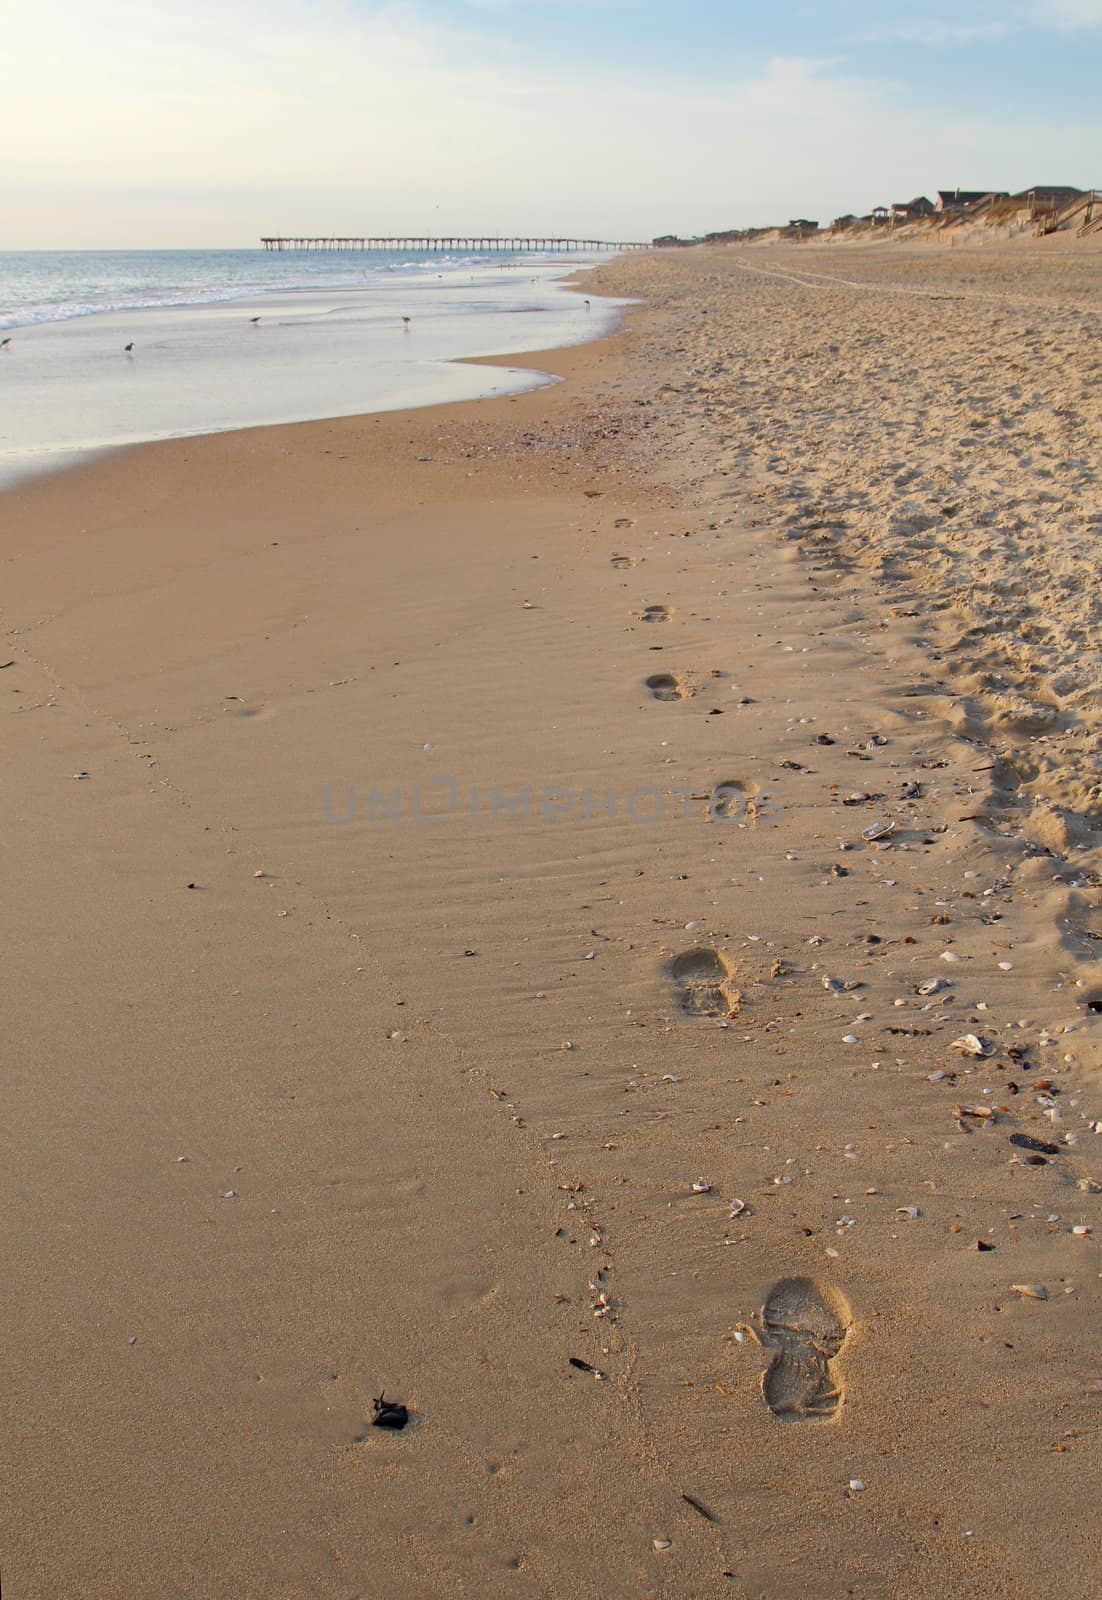 A single pair of footsteps along on empty beach in the early morning on the Outer Banks of North Carolina with beach houses and a fishing pier in the background